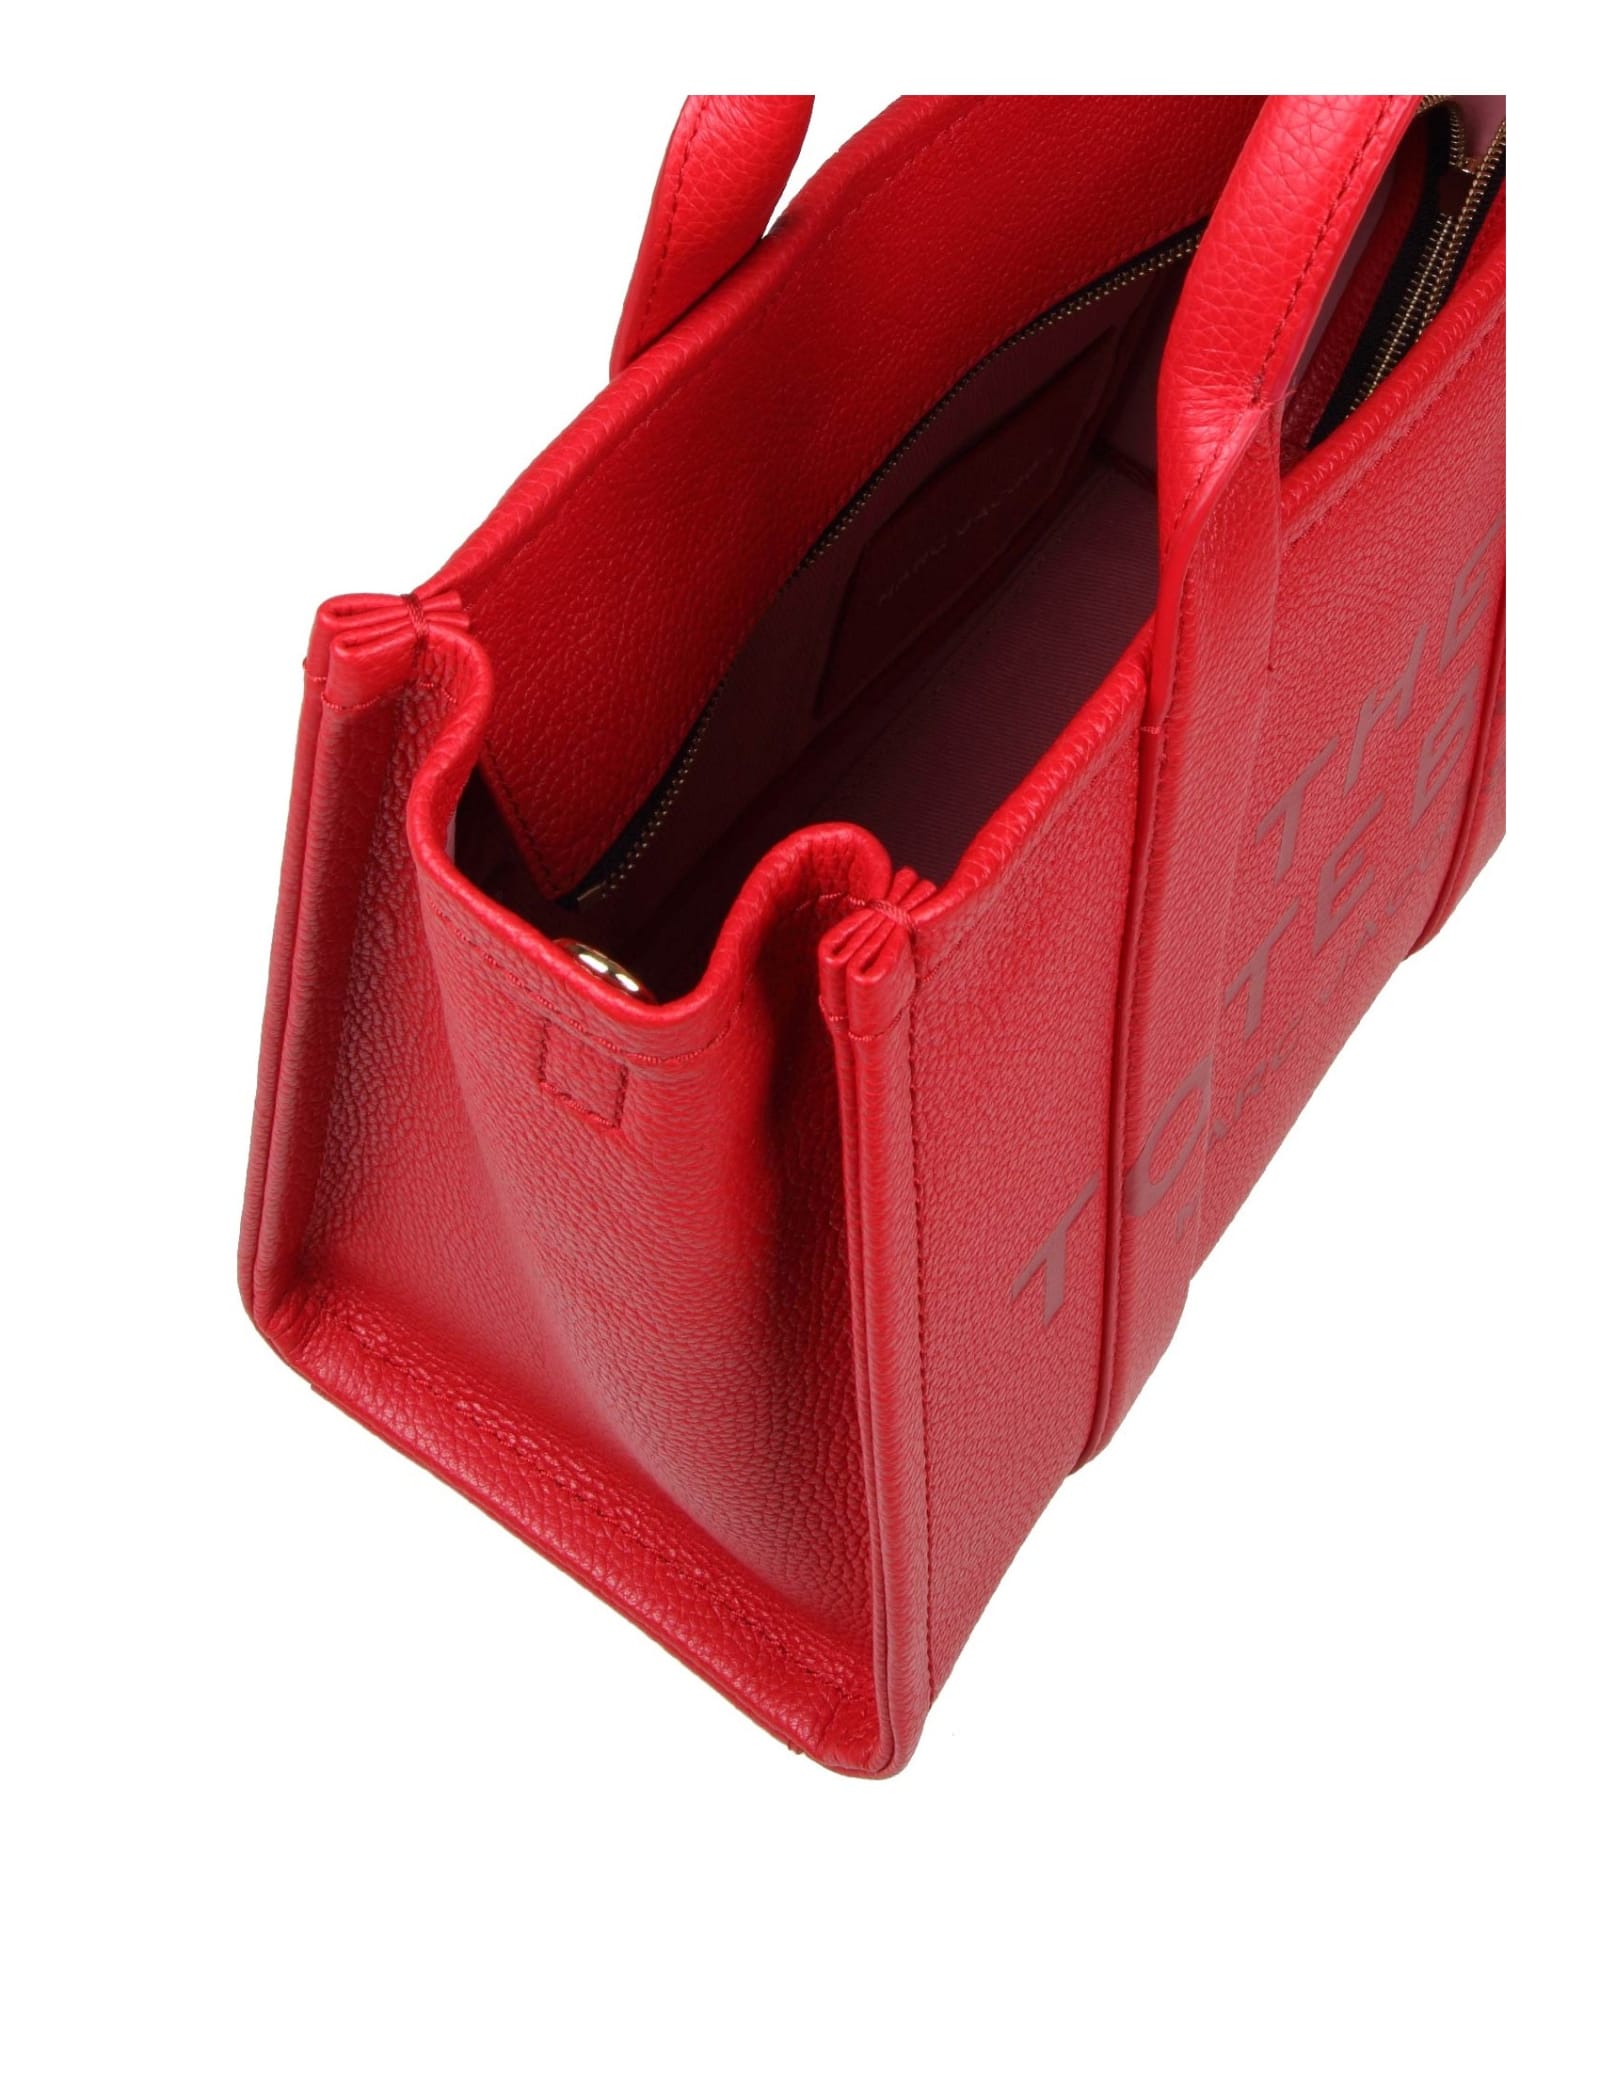 Shop Marc Jacobs Medium Tote In Red Leather In True Red